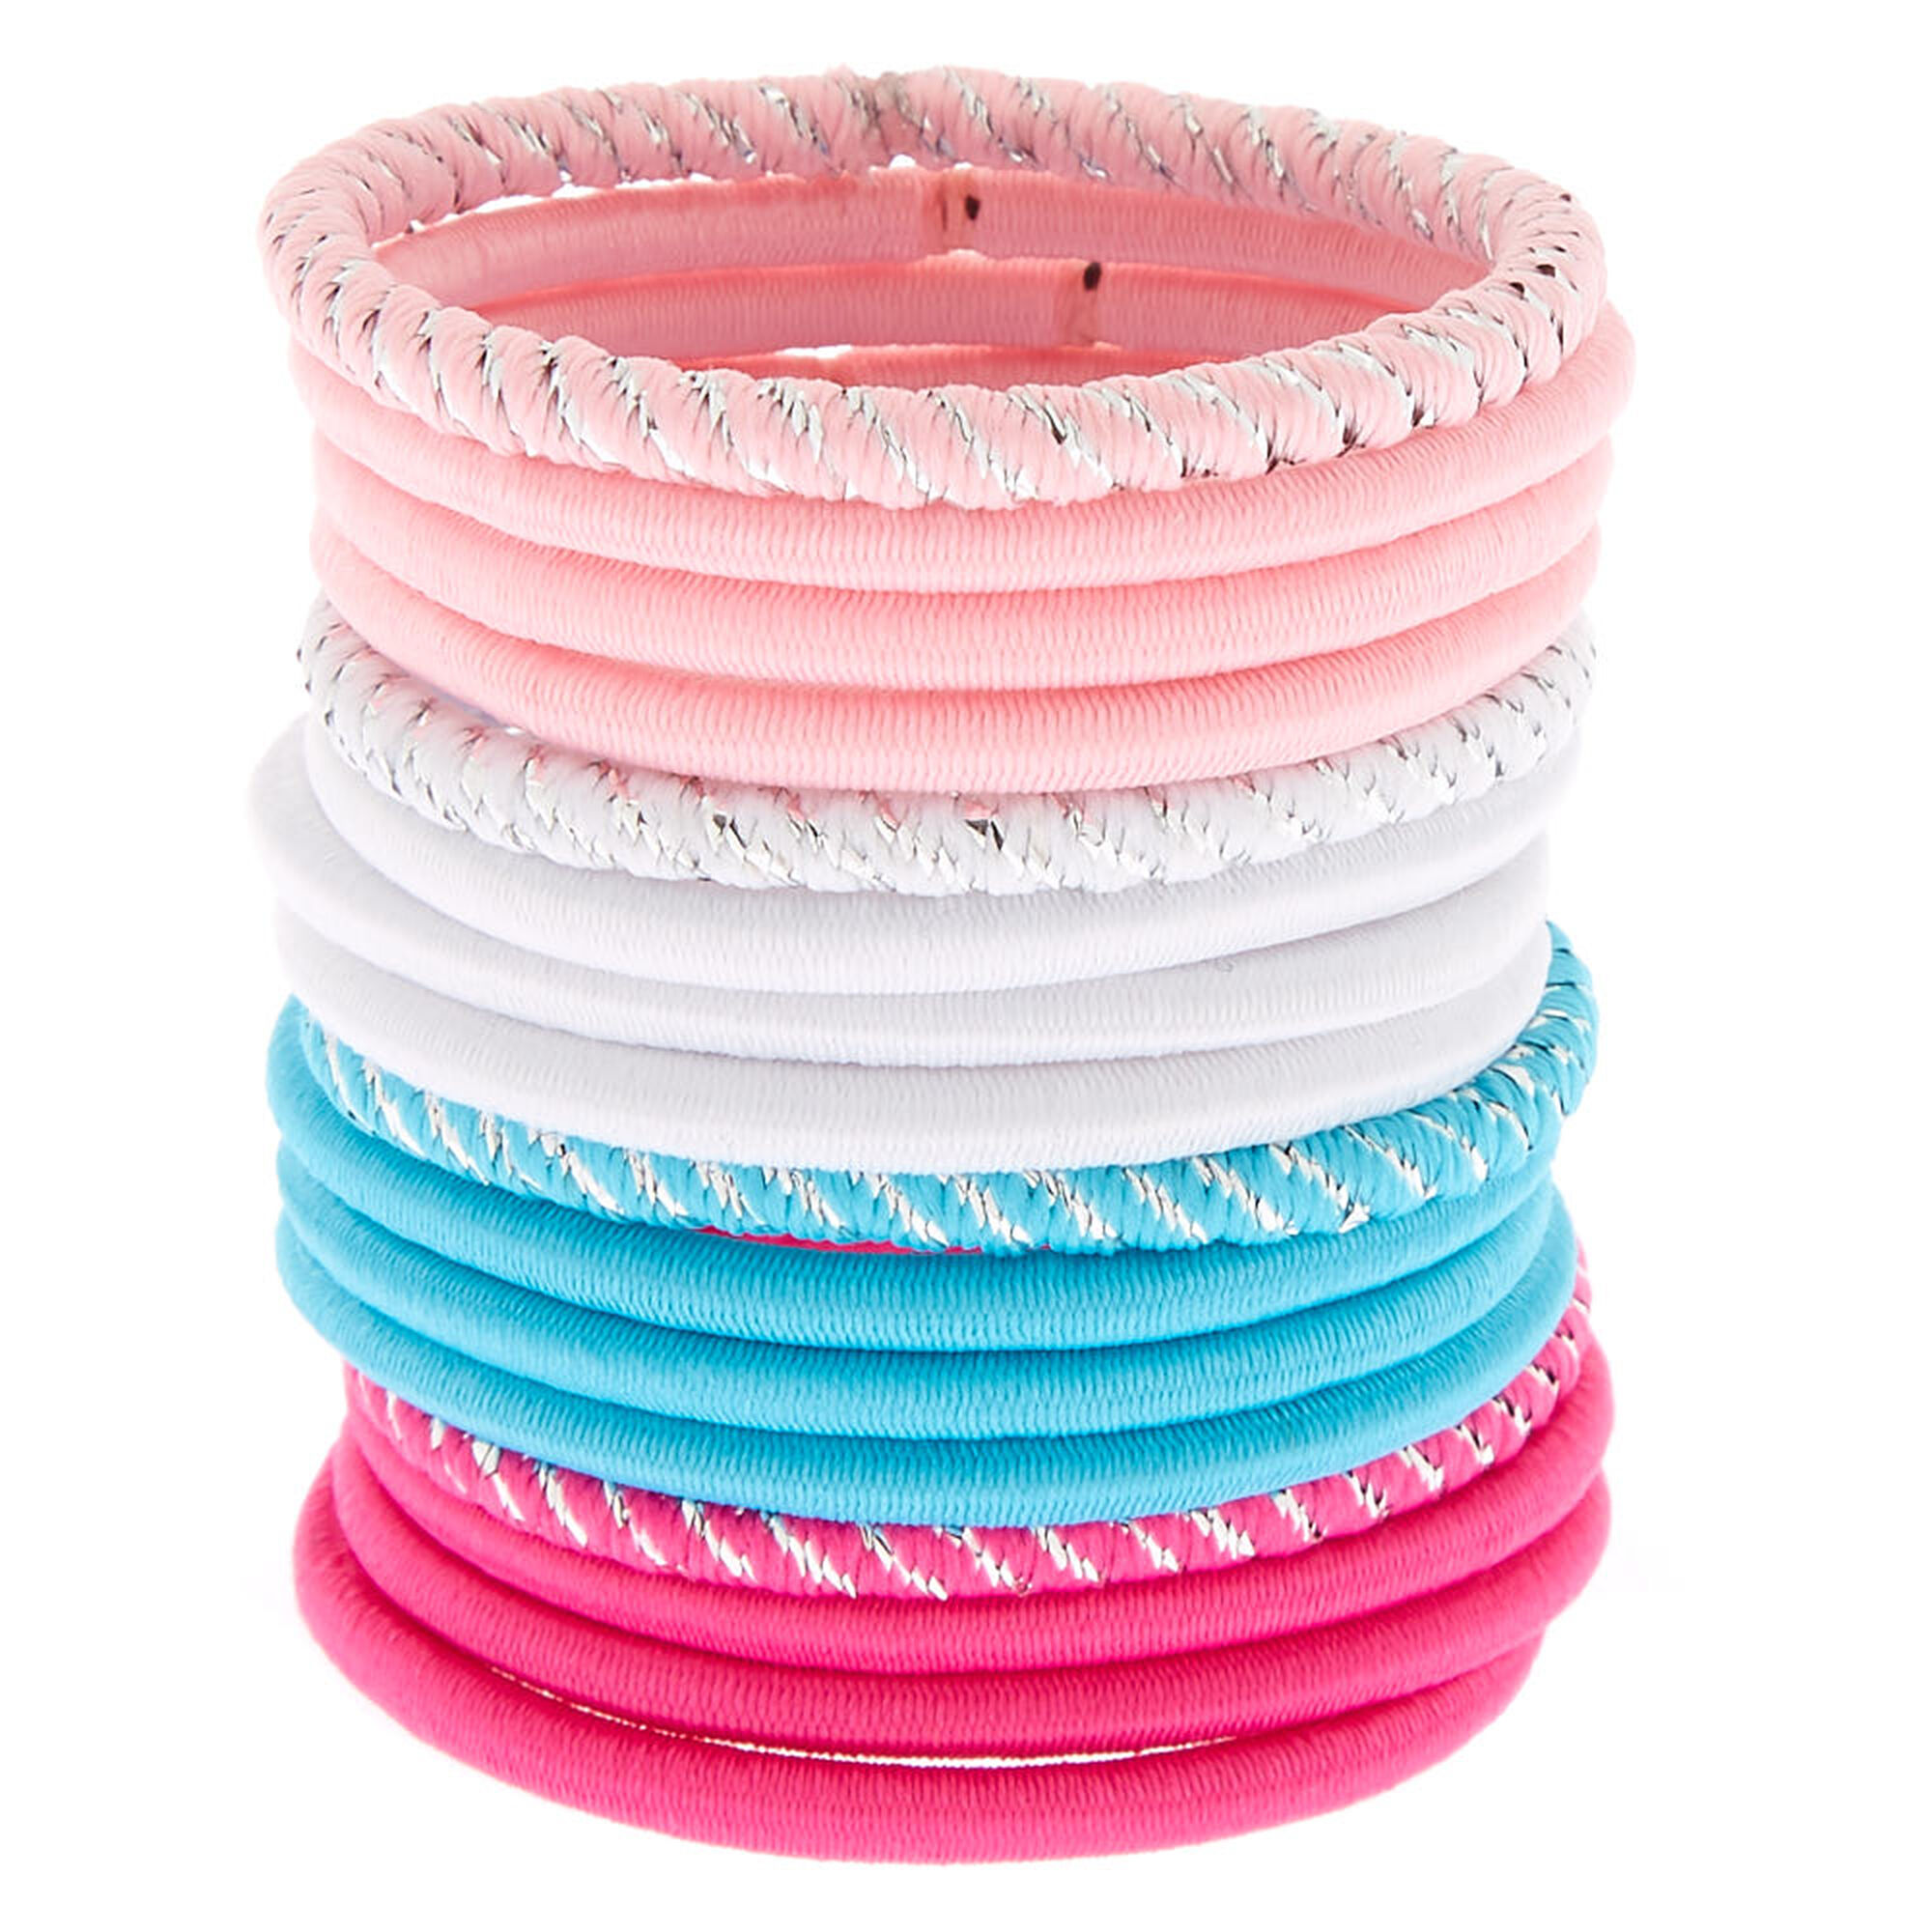 View Claires Club Hair Bobbles 16 Pack information